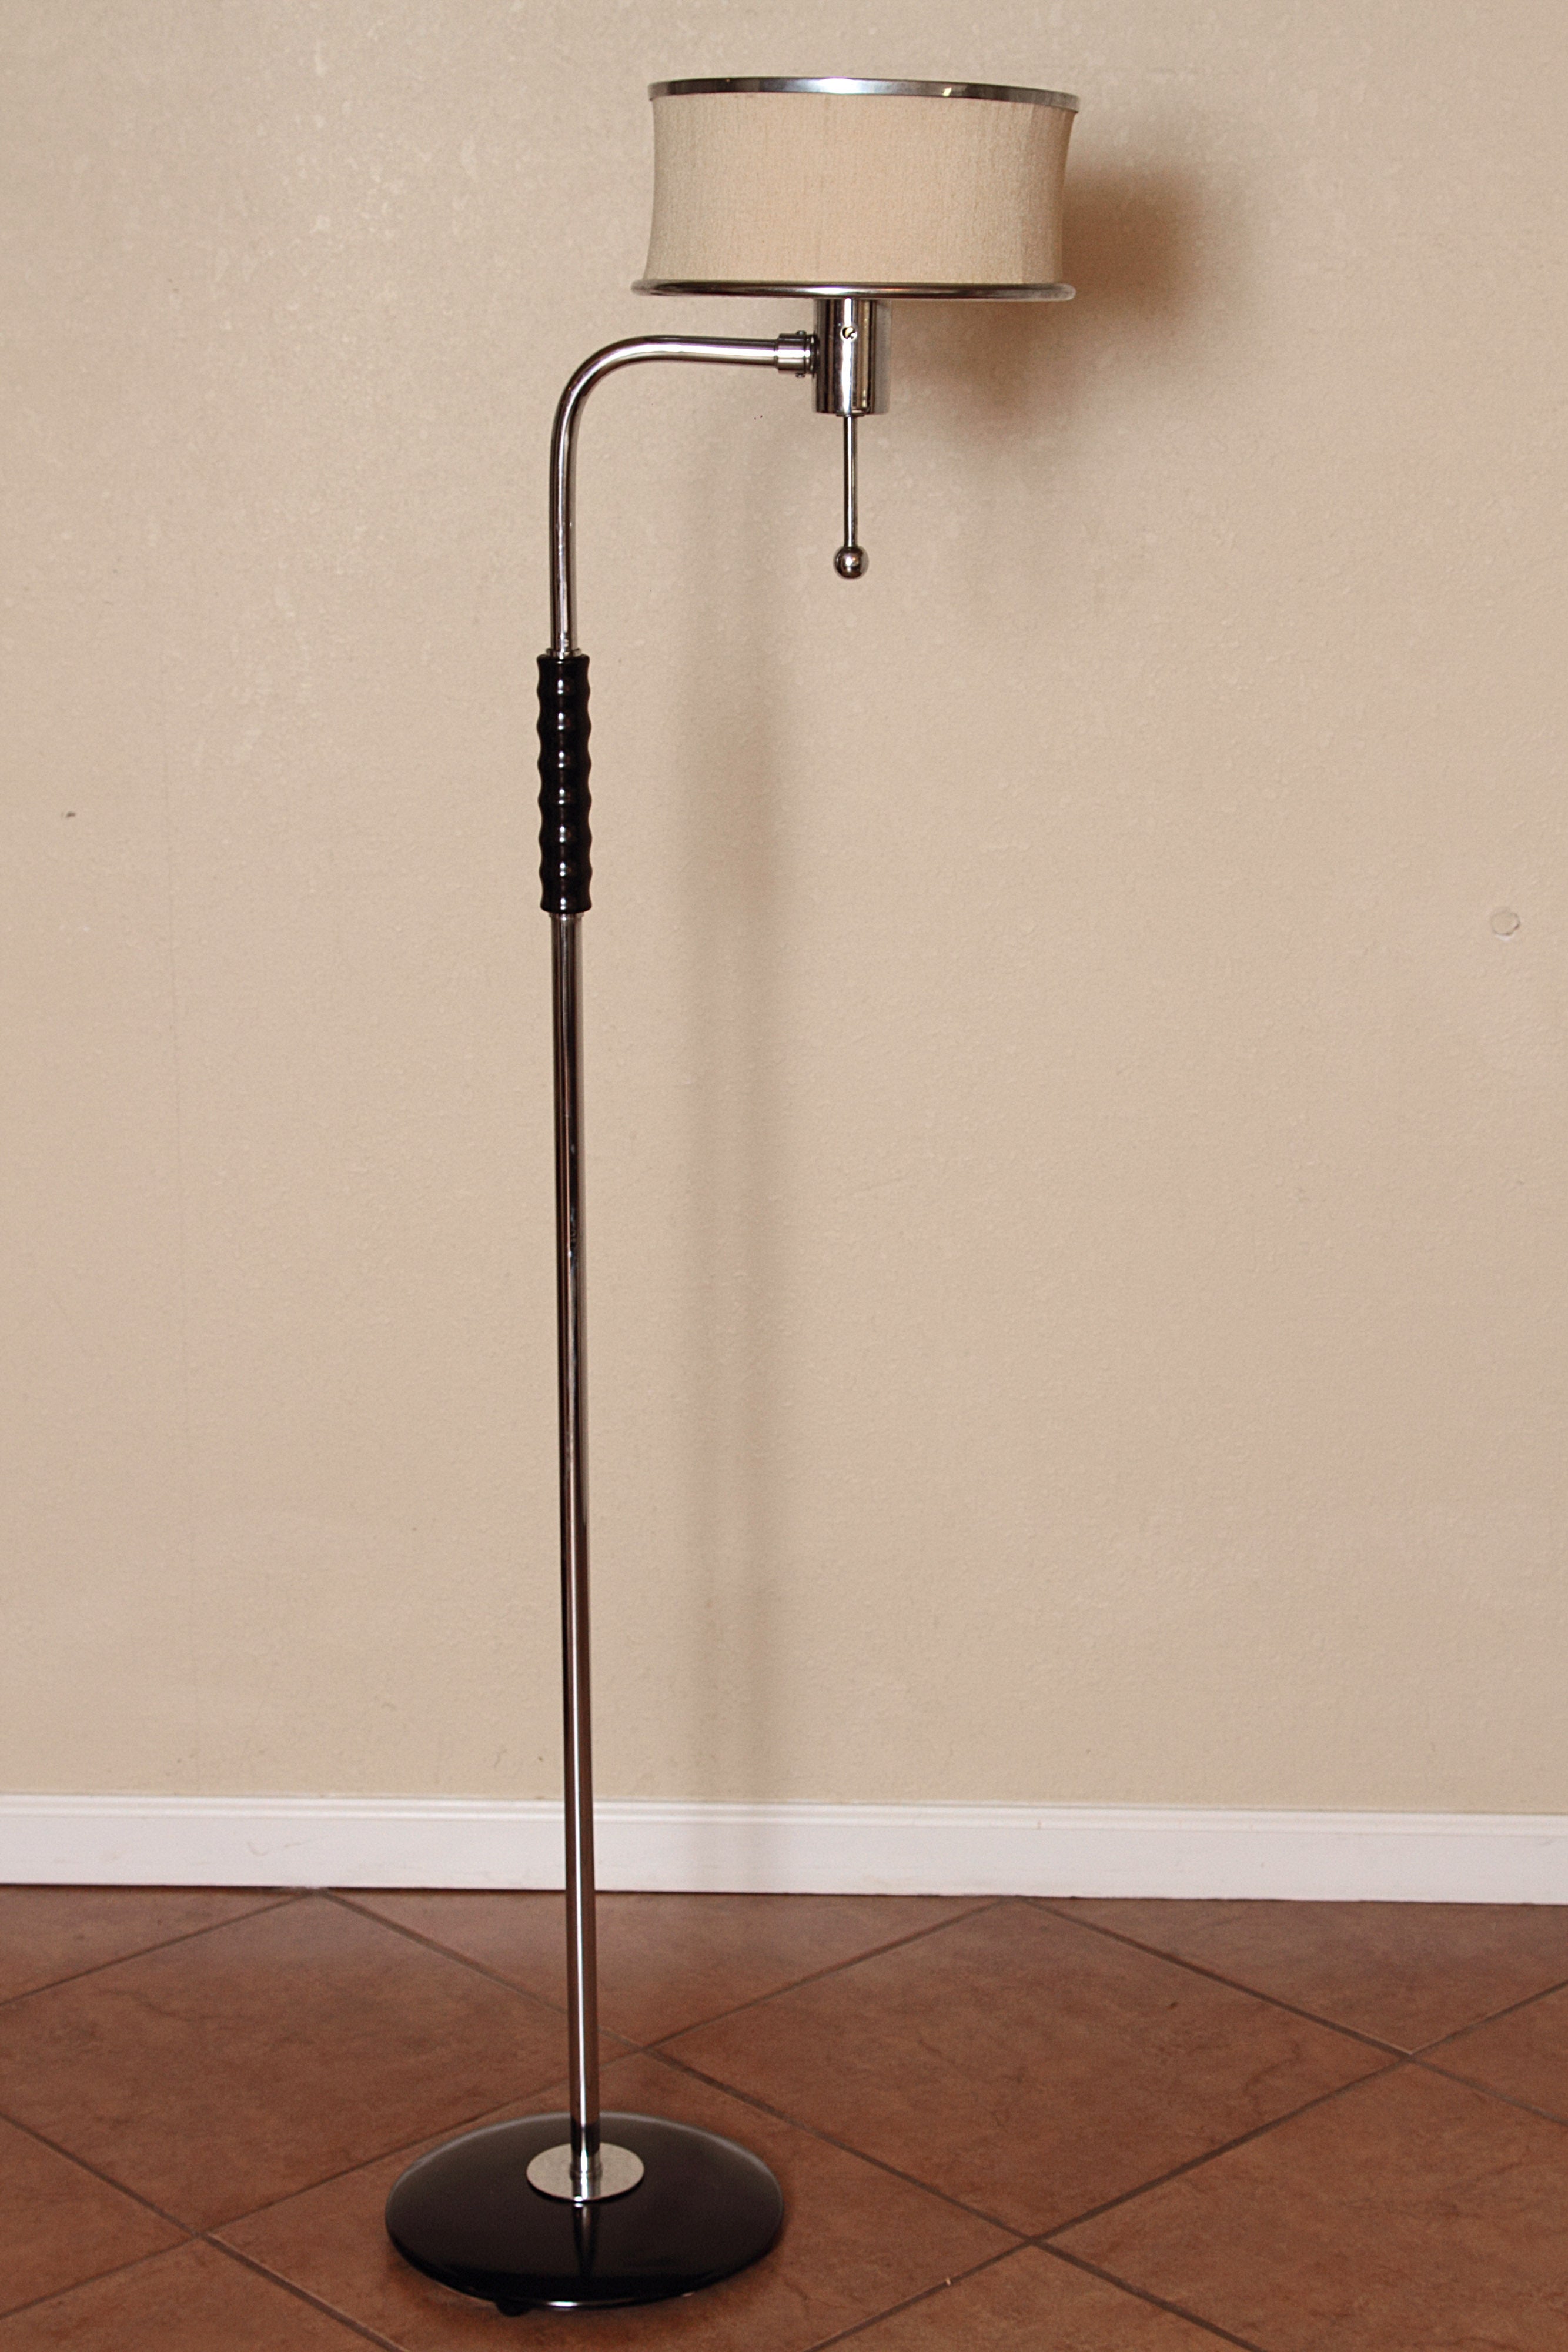 American Classic Gilbert Rohde for Mutual Sunset Machine Age Floor Lamp MSLC No. 3901